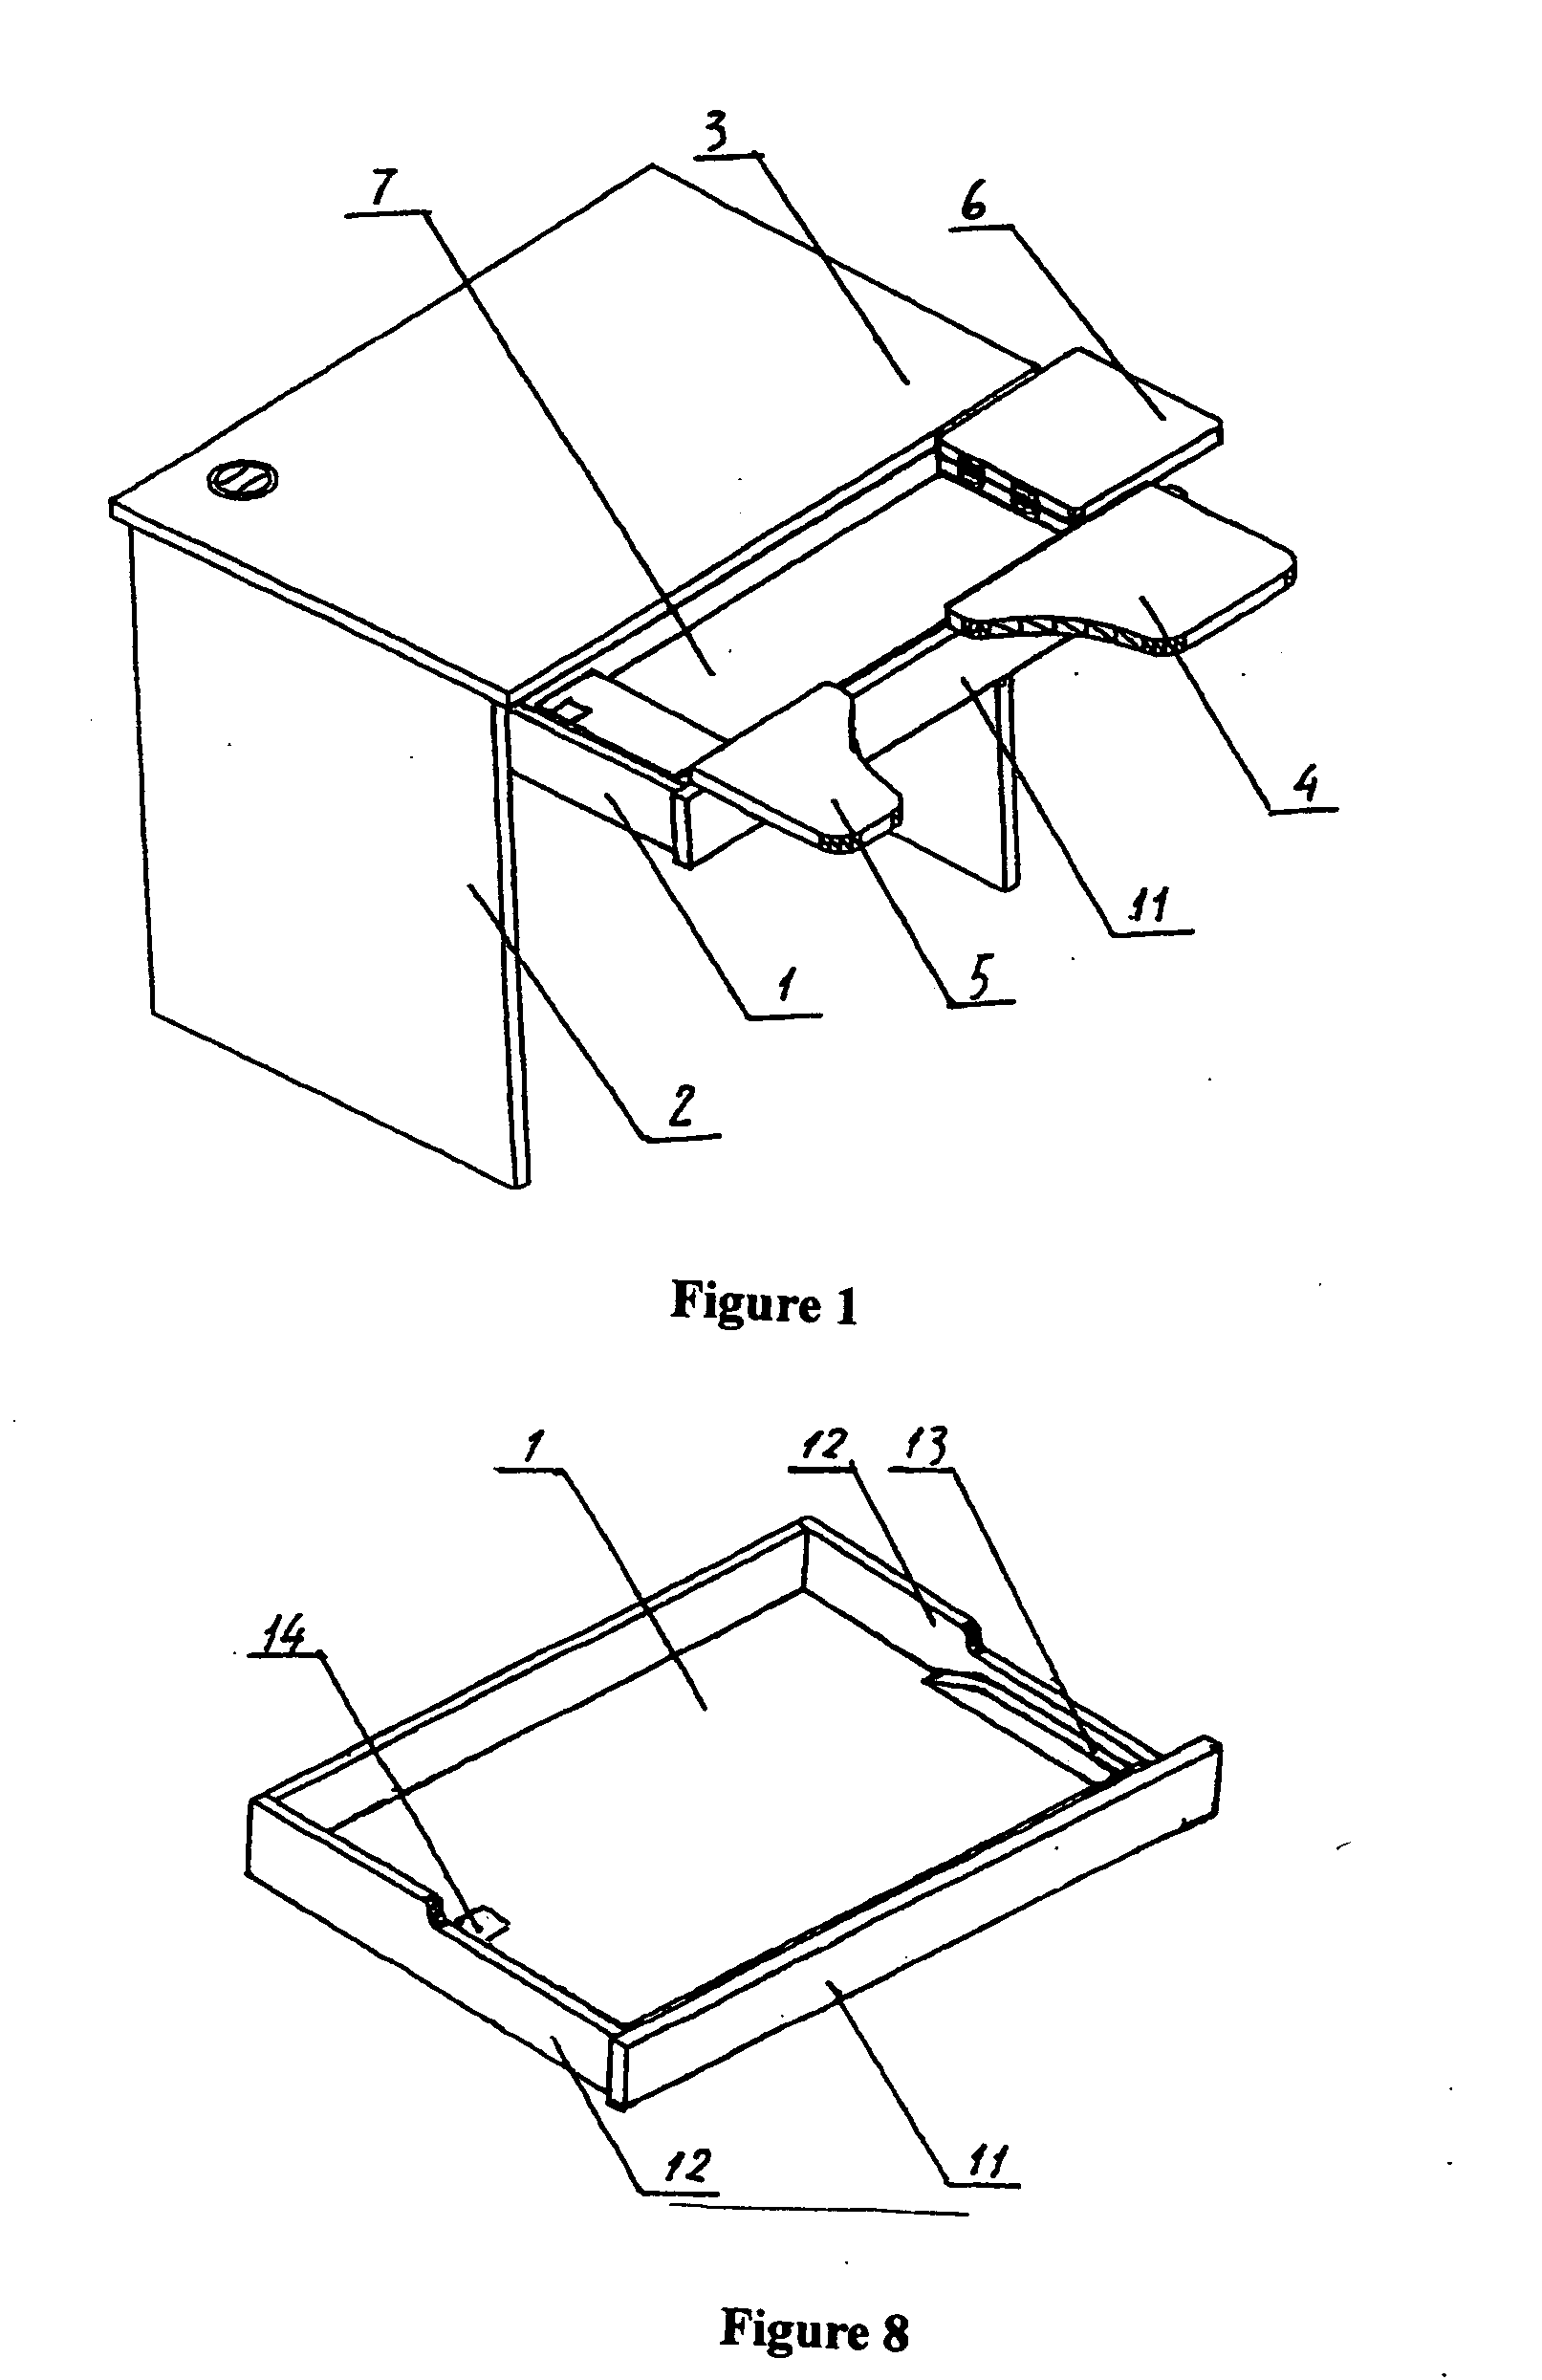 Computer desk with a drawer connected with elbow support boards